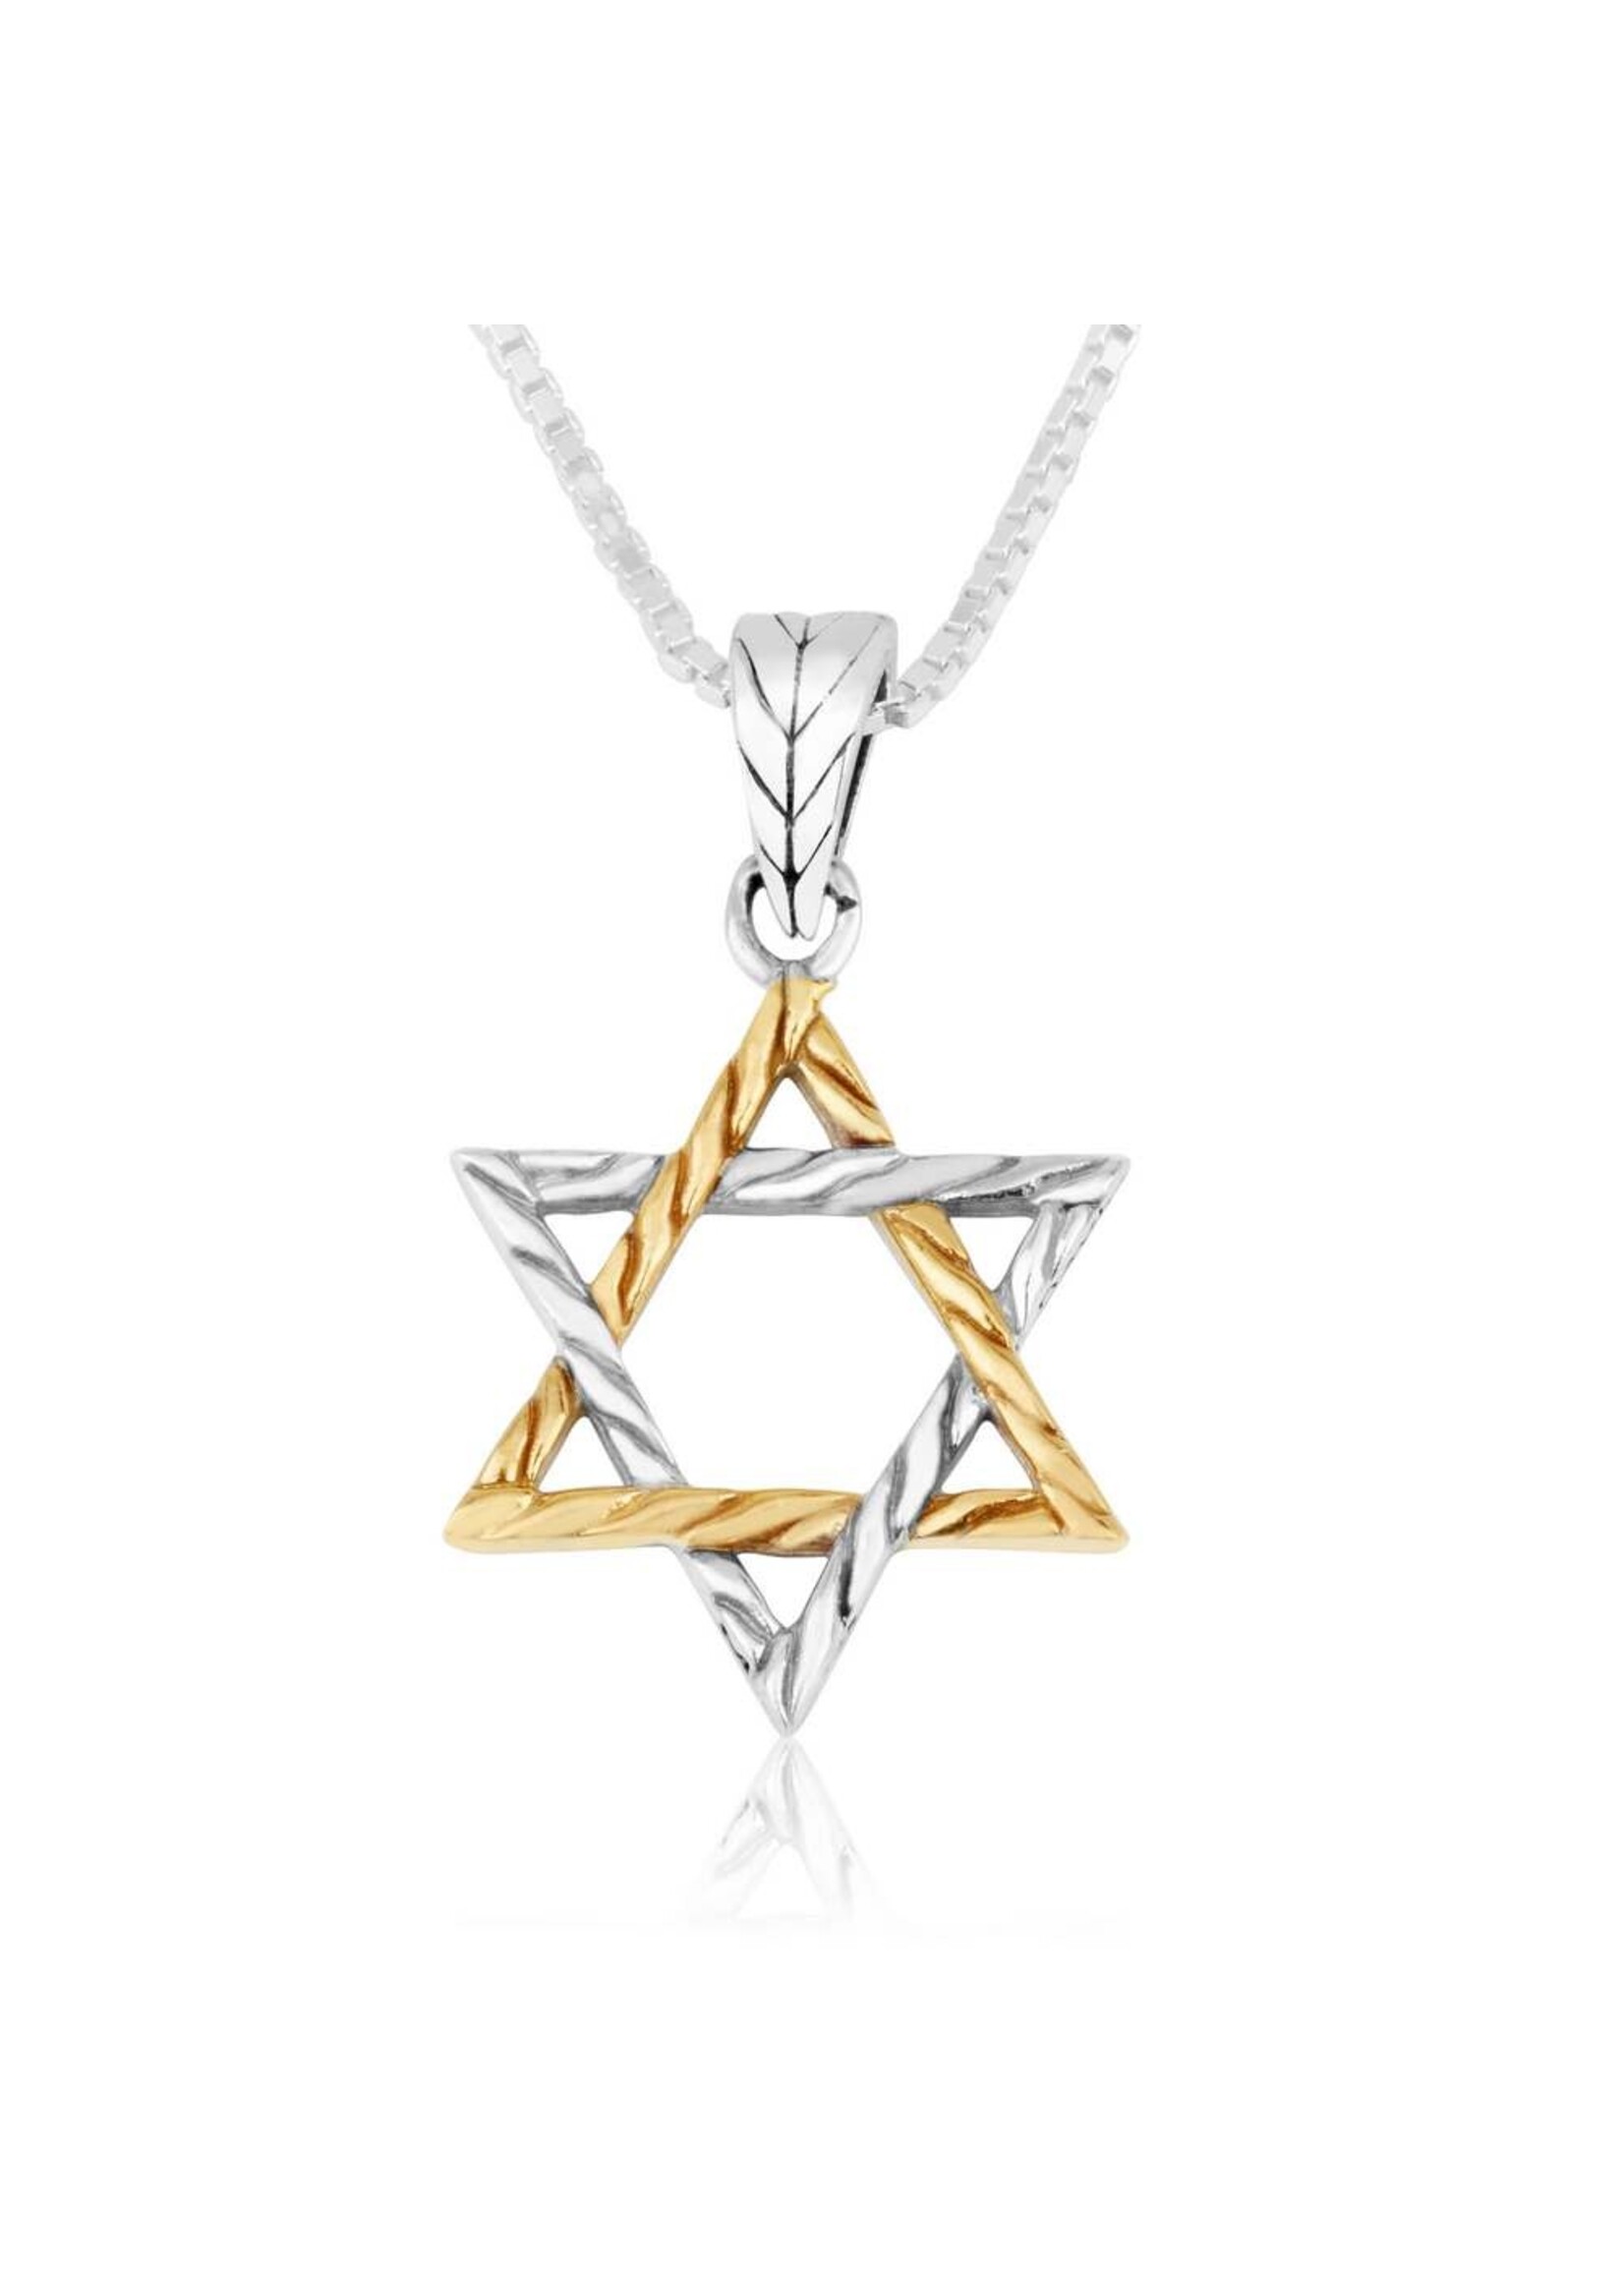 NECKLACE STERLING SILVER AND GOLD PLATED ROPE MAGUEN DAVID